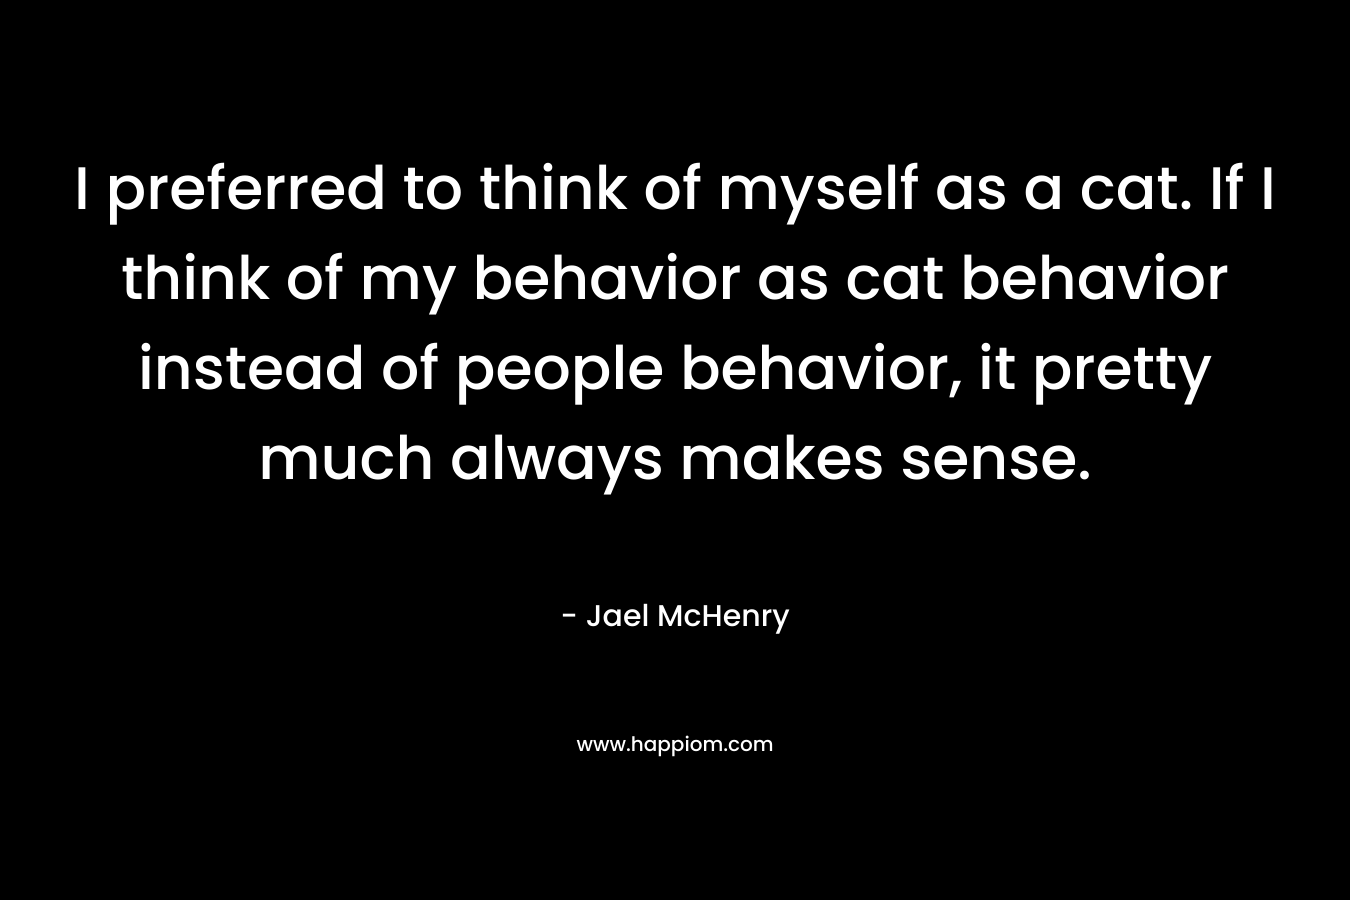 I preferred to think of myself as a cat. If I think of my behavior as cat behavior instead of people behavior, it pretty much always makes sense.